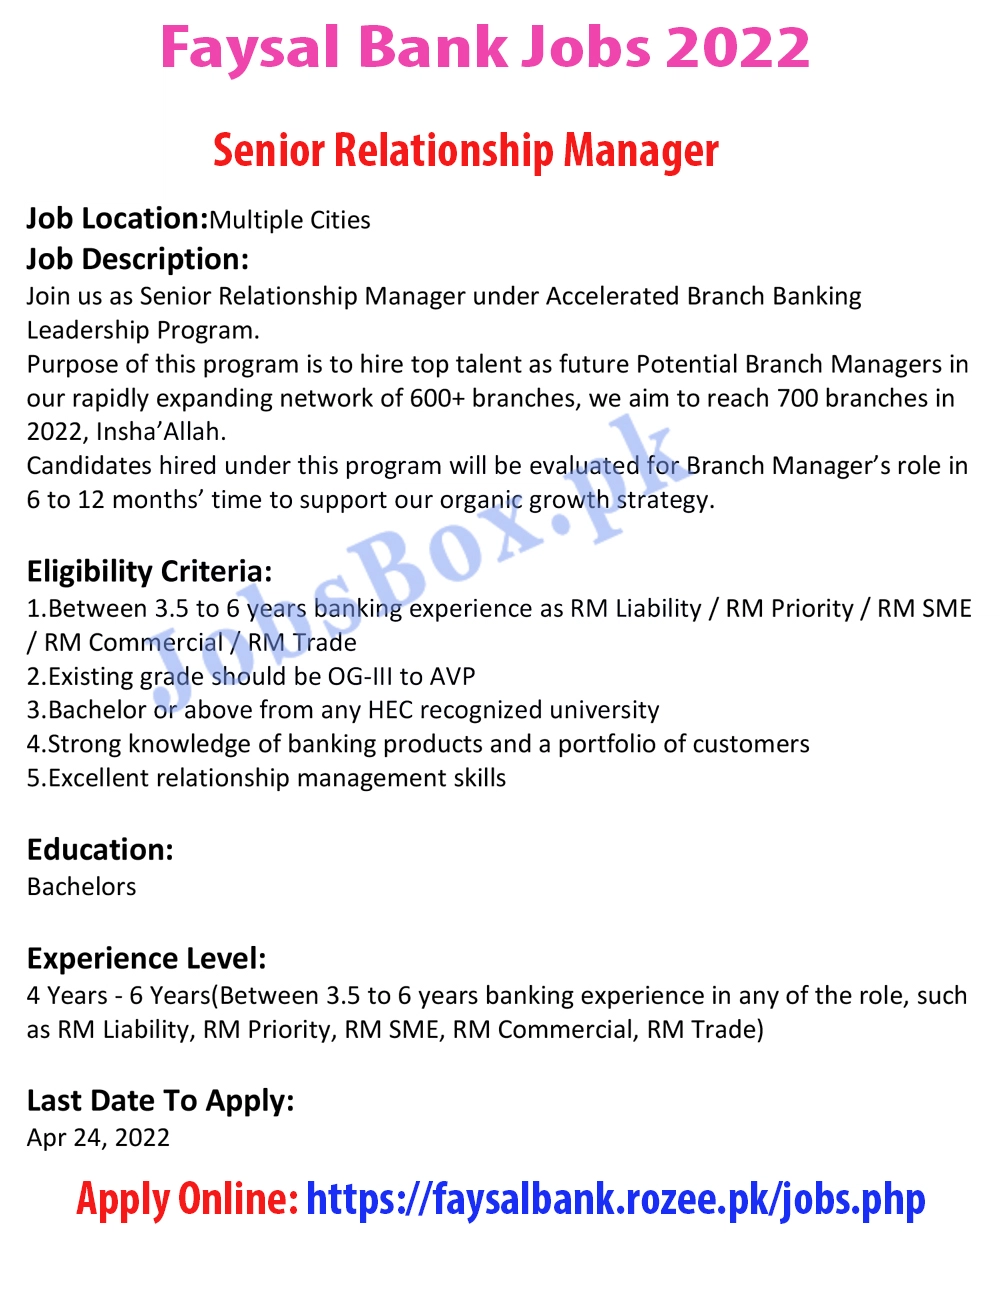 Faysal Bank Jobs 2022 for Senior Relationship Managers – Online Form